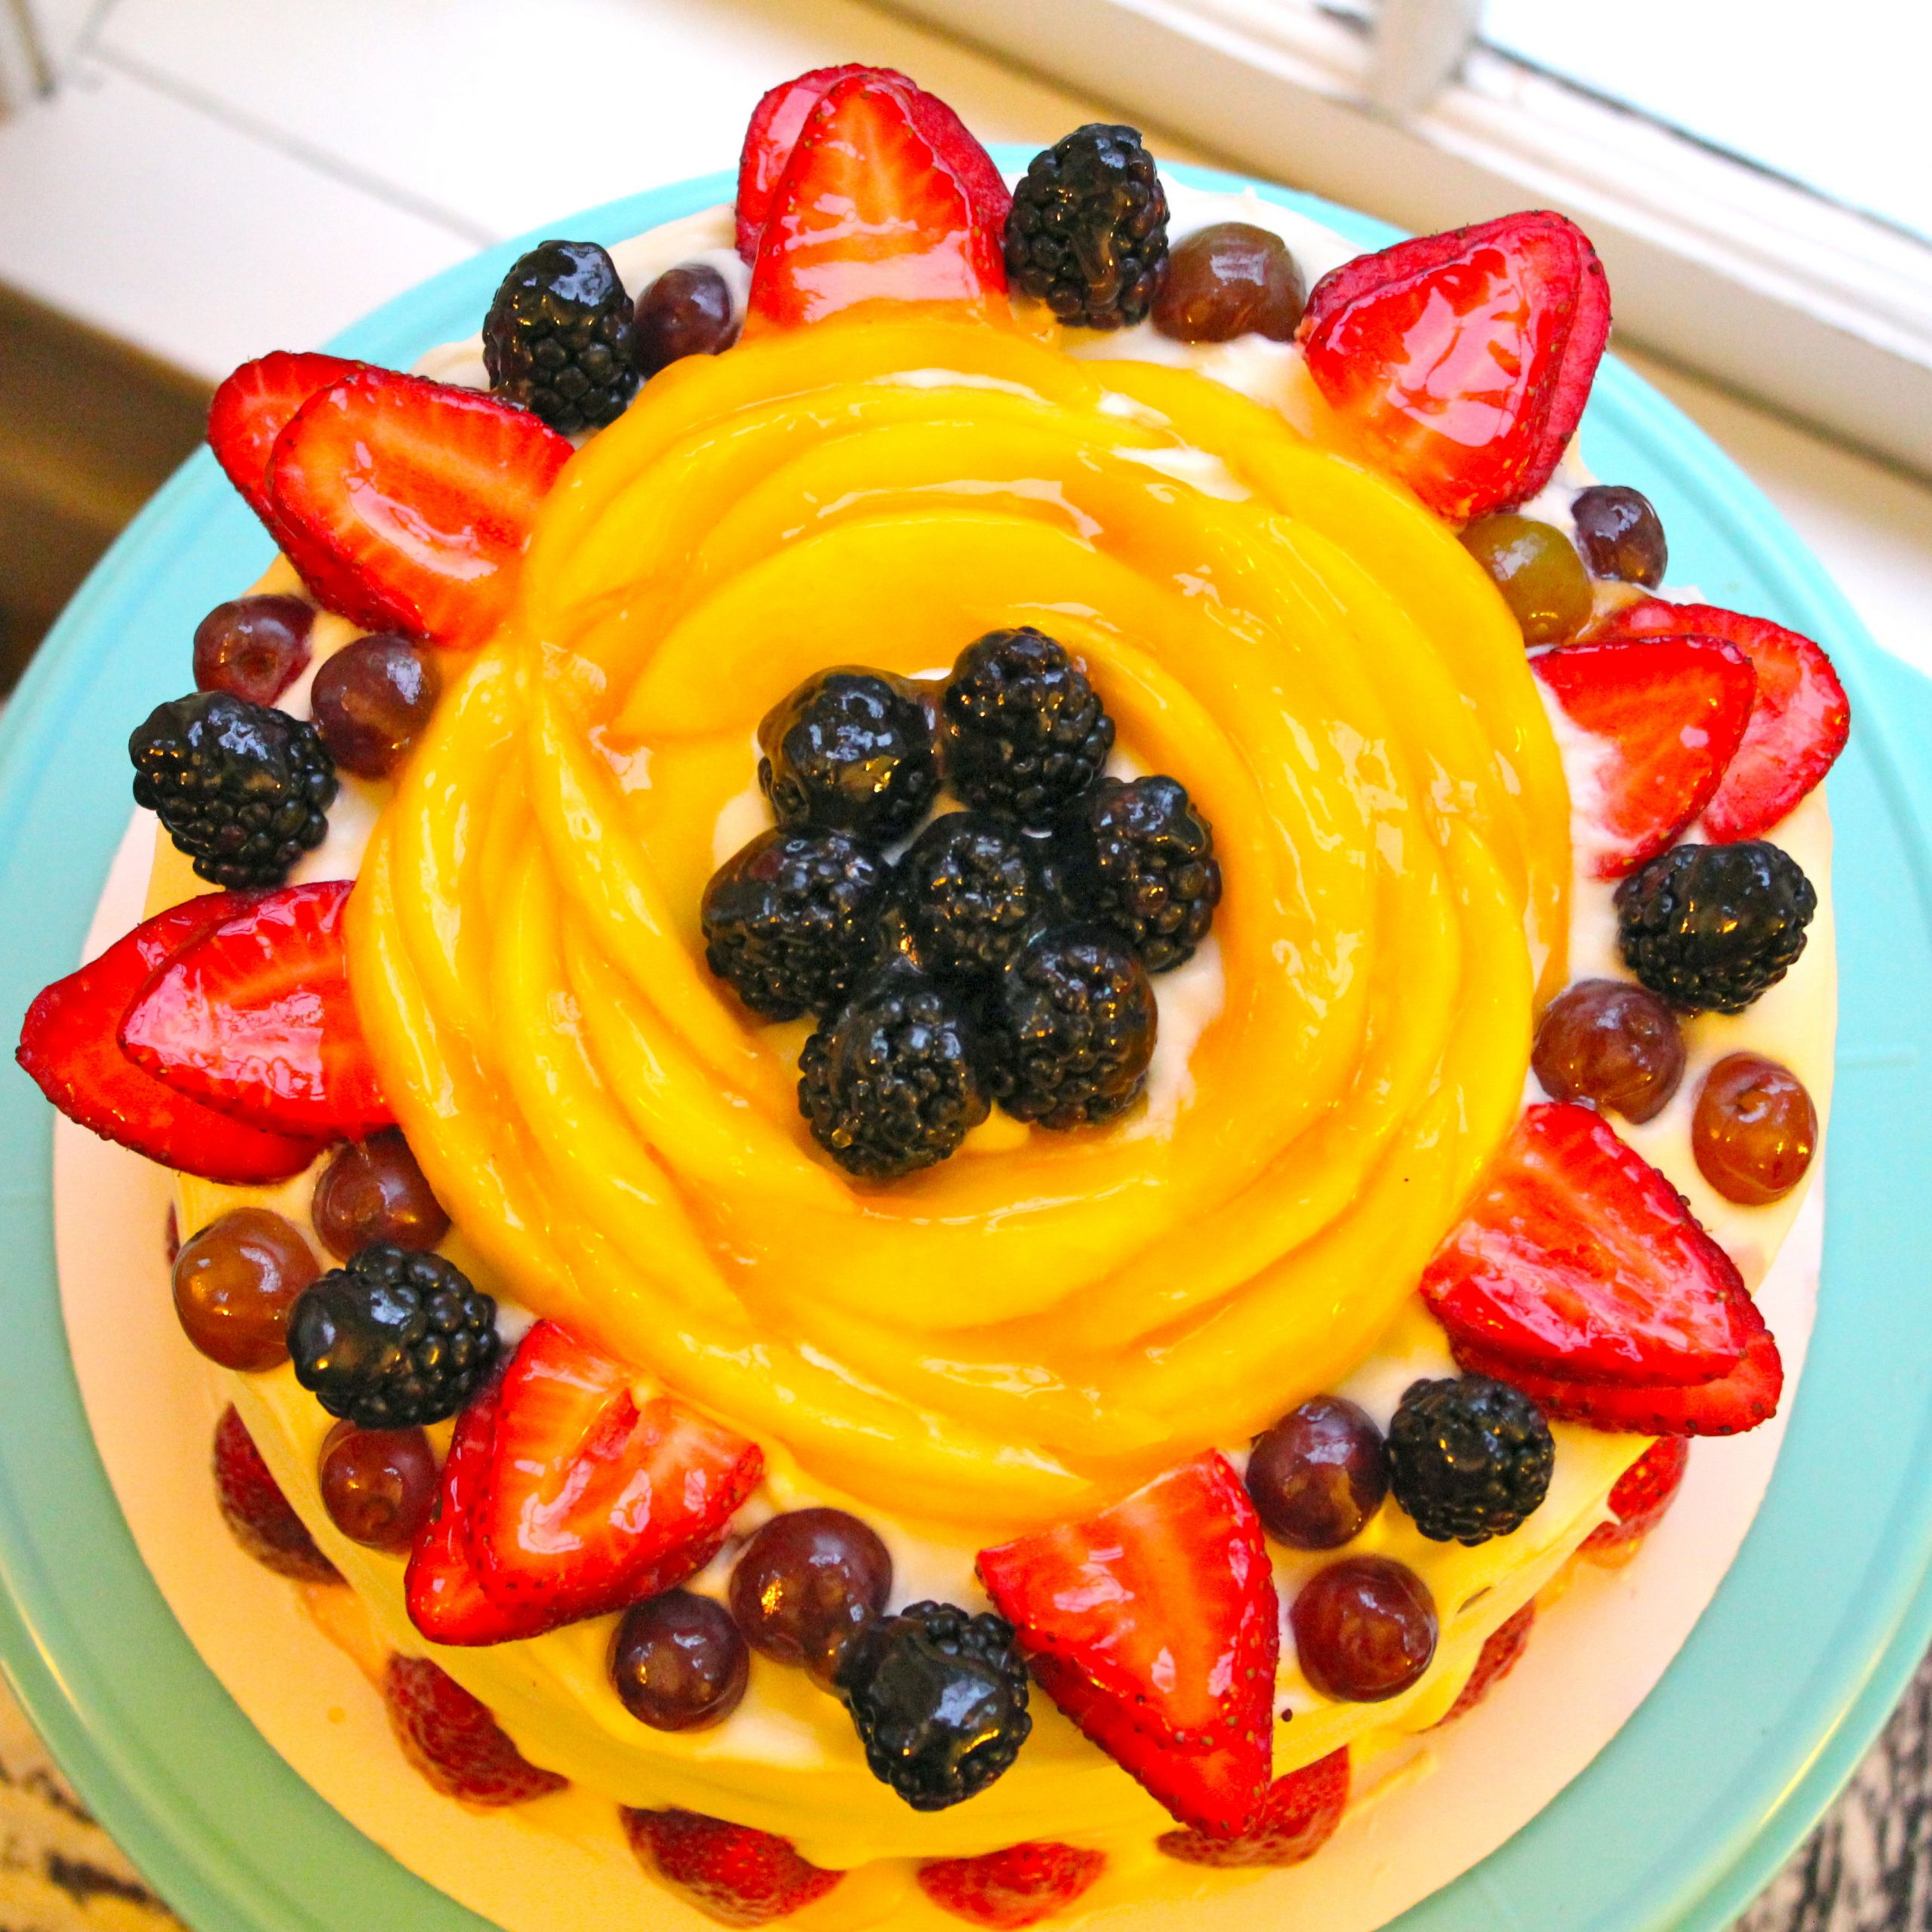 Spring Fling Cake Recipe
 The one – the only – Spring Fling Cake